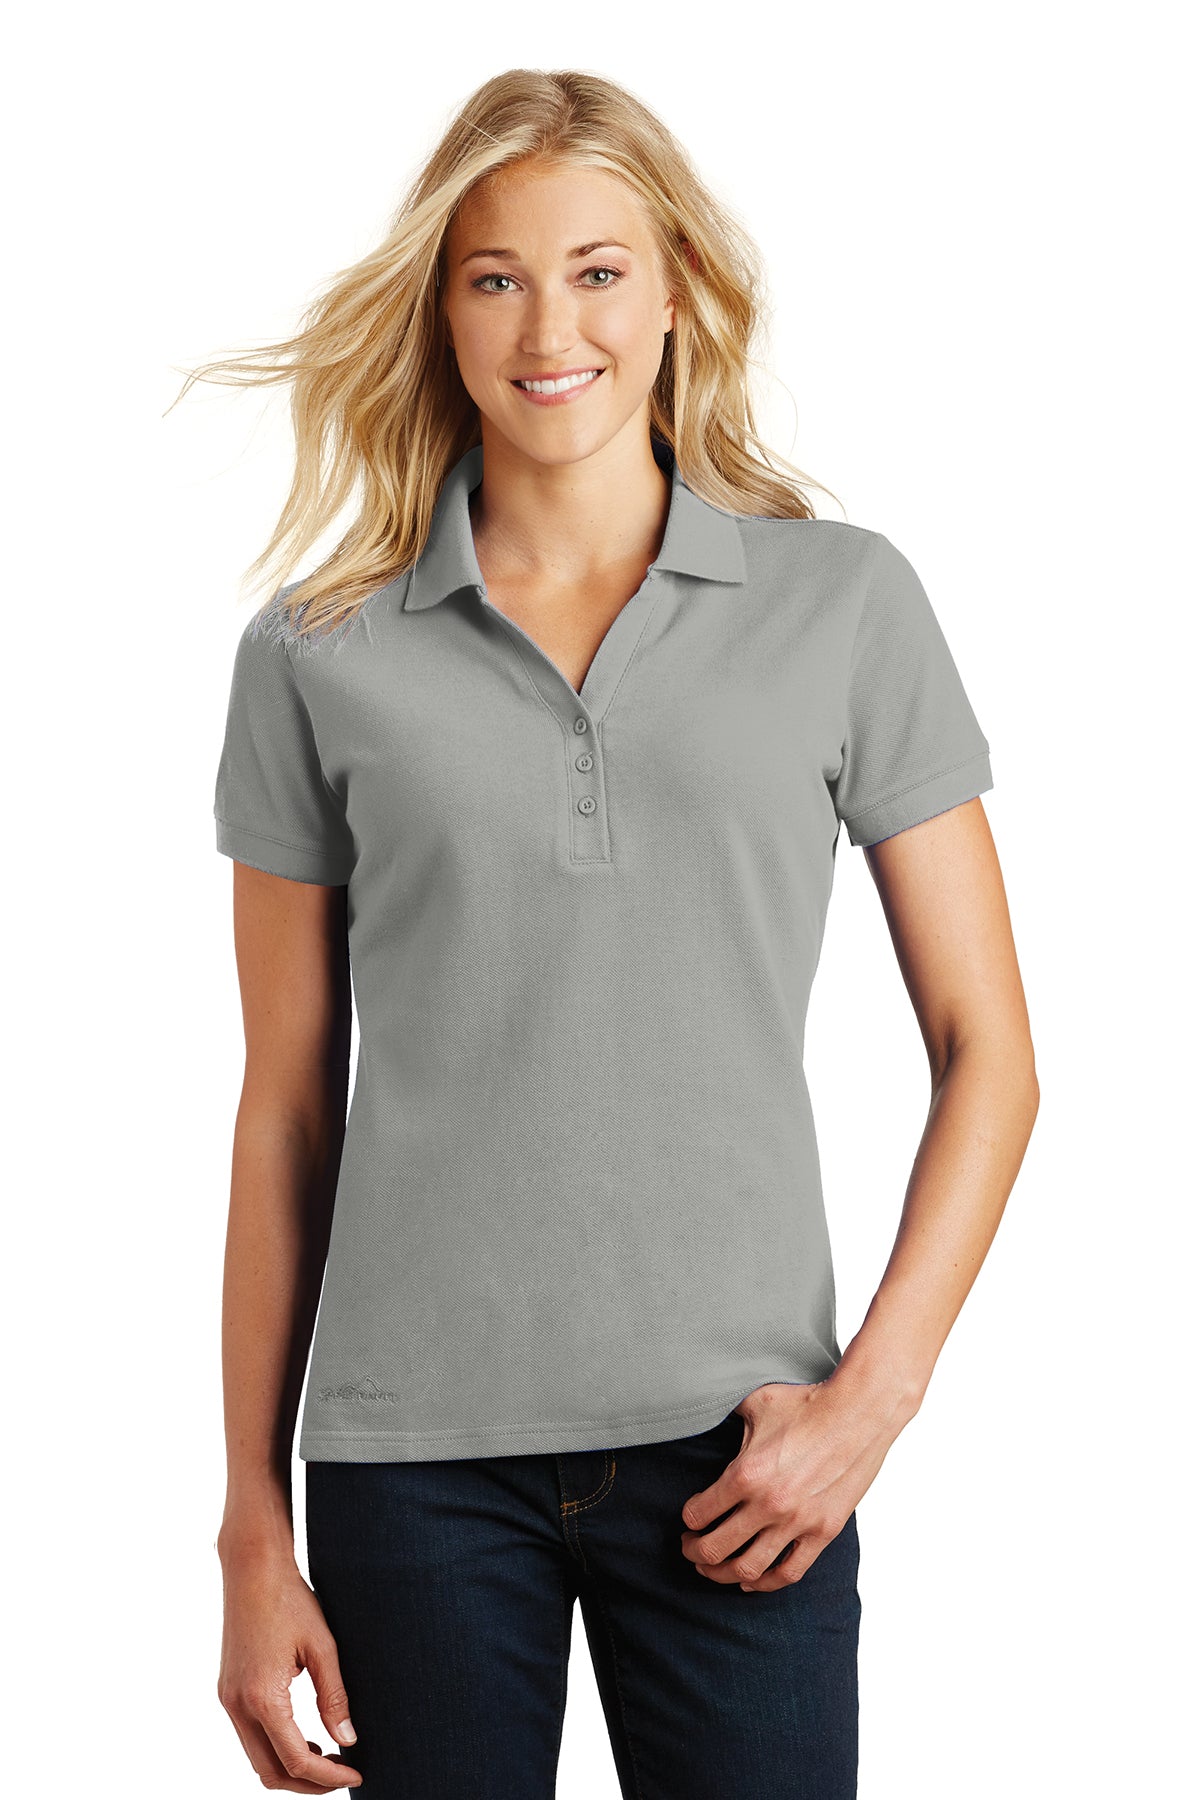 LL Two Oars (Embroidered) Women's Eddie Bauer golf polo